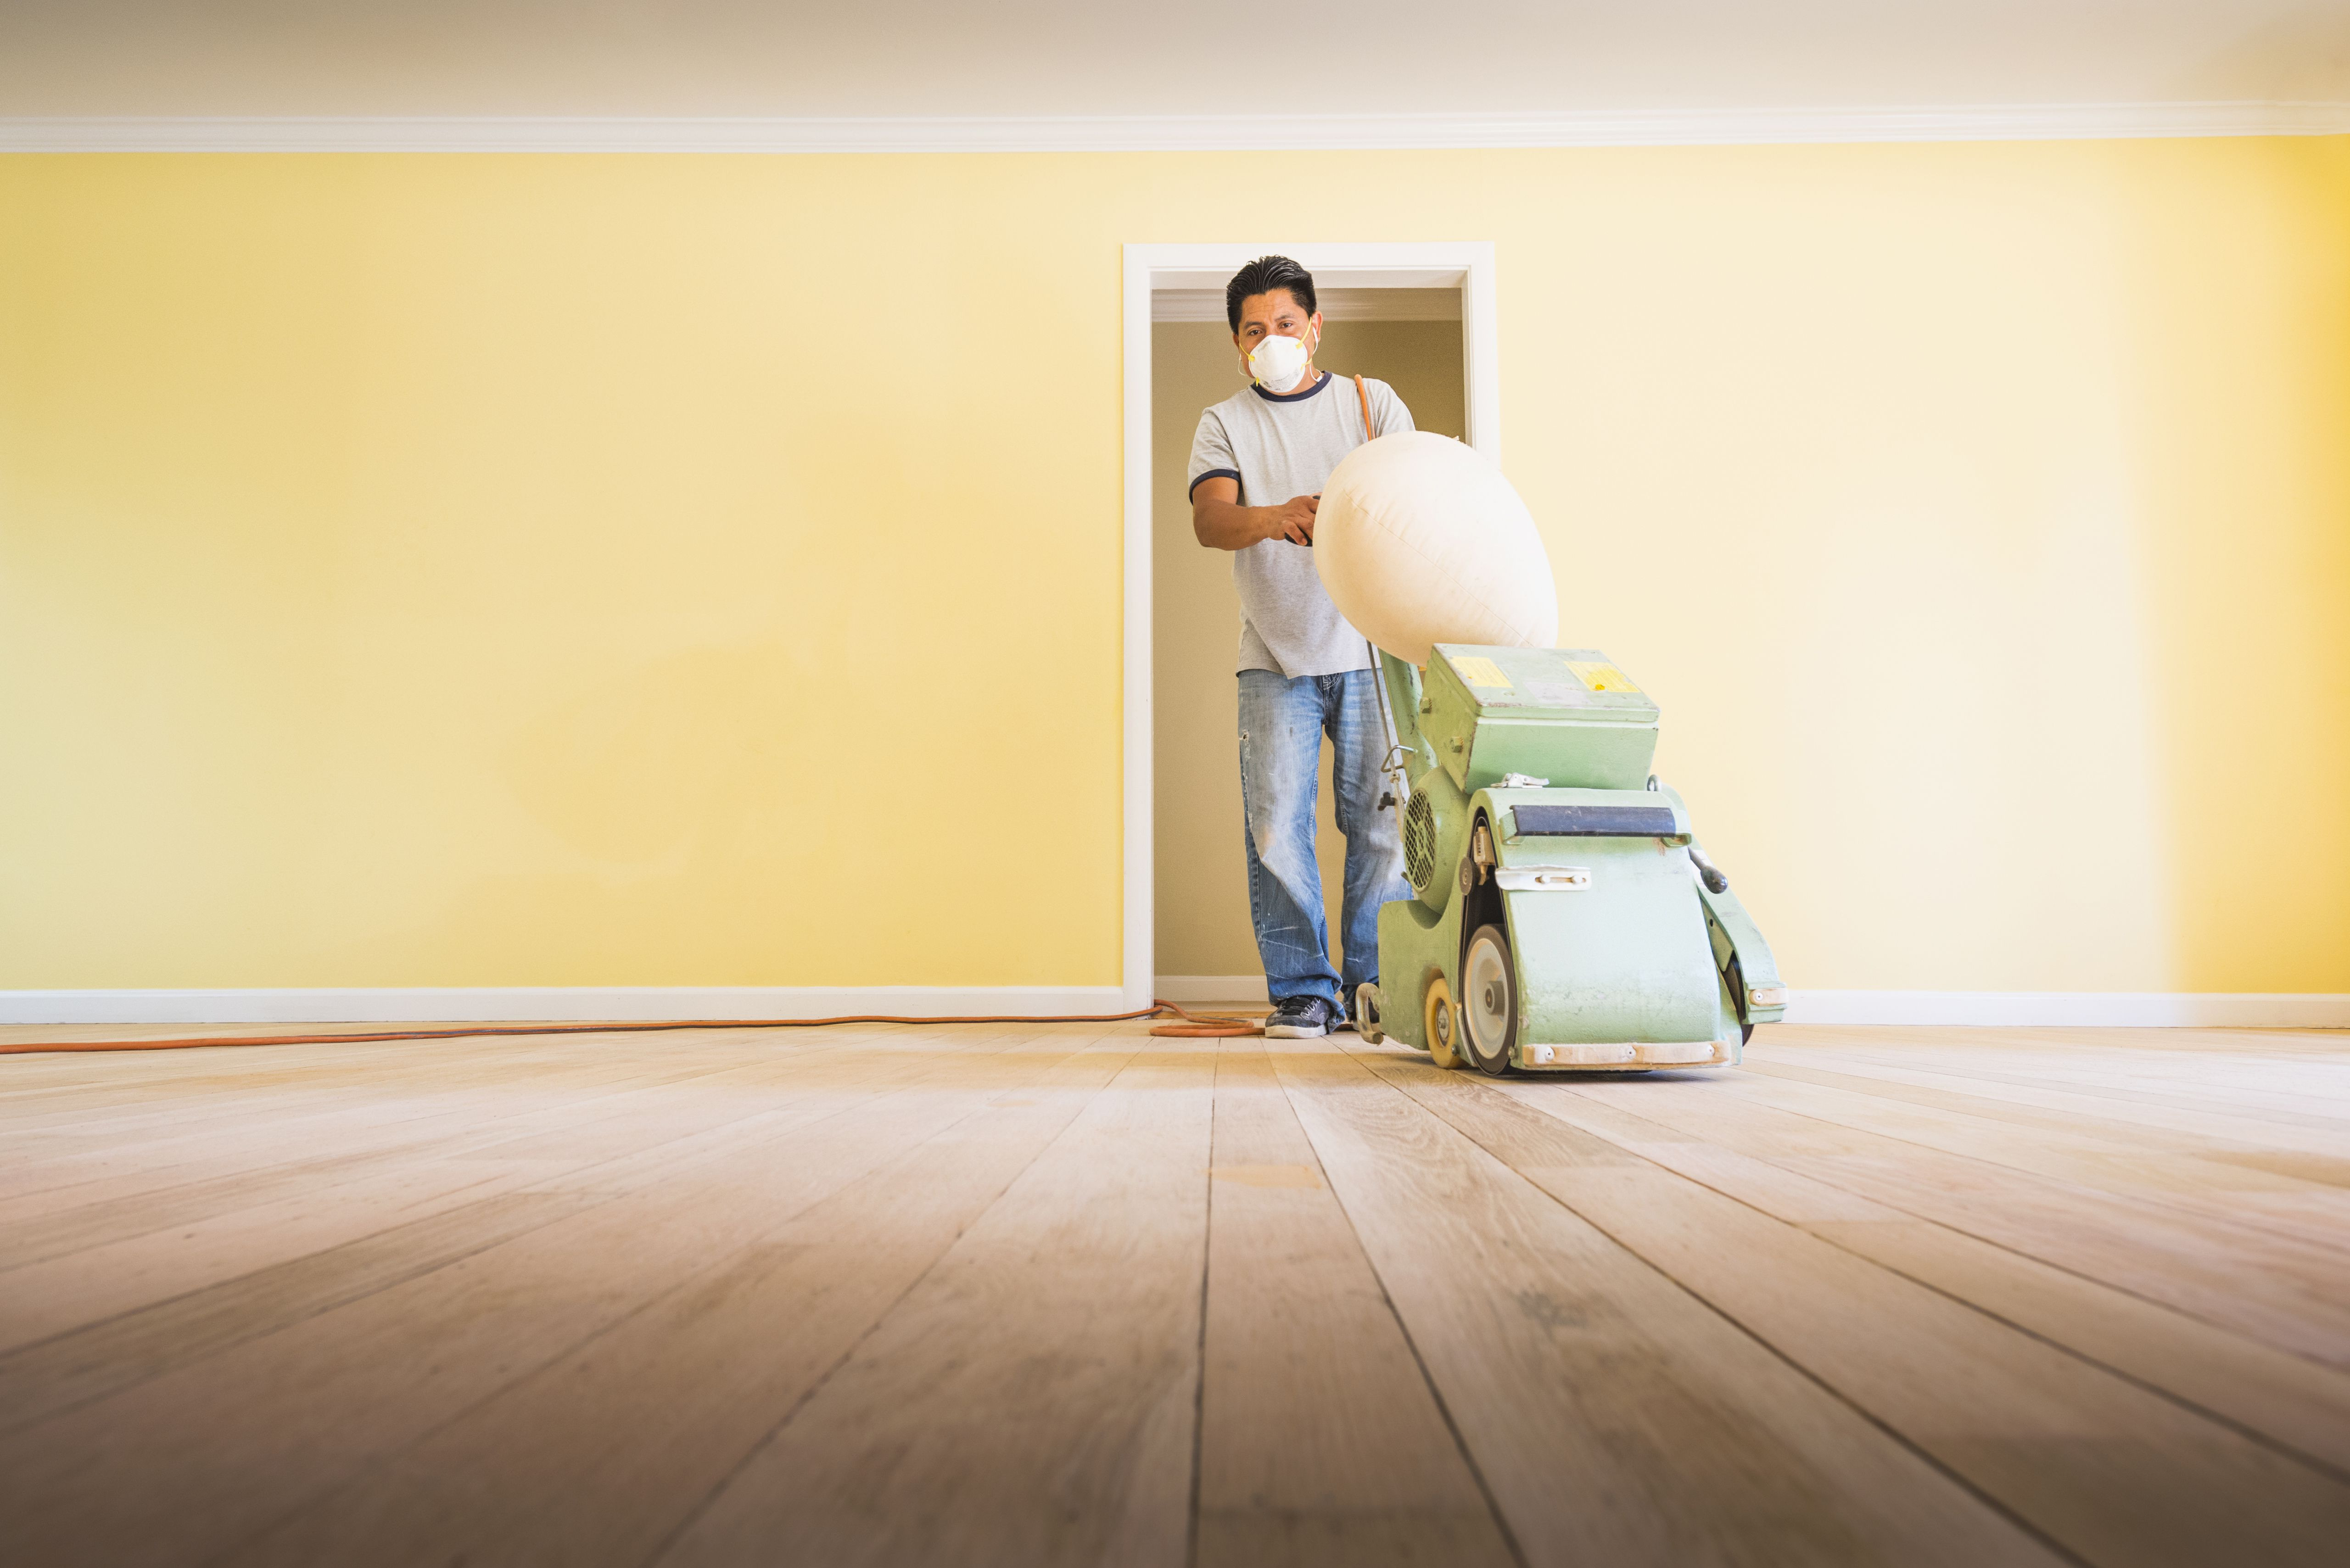 15 Amazing Cost to Resurface Hardwood Floors 2024 free download cost to resurface hardwood floors of should you paint walls or refinish floors first within floorsandingafterpainting 5a8f08dfae9ab80037d9d878